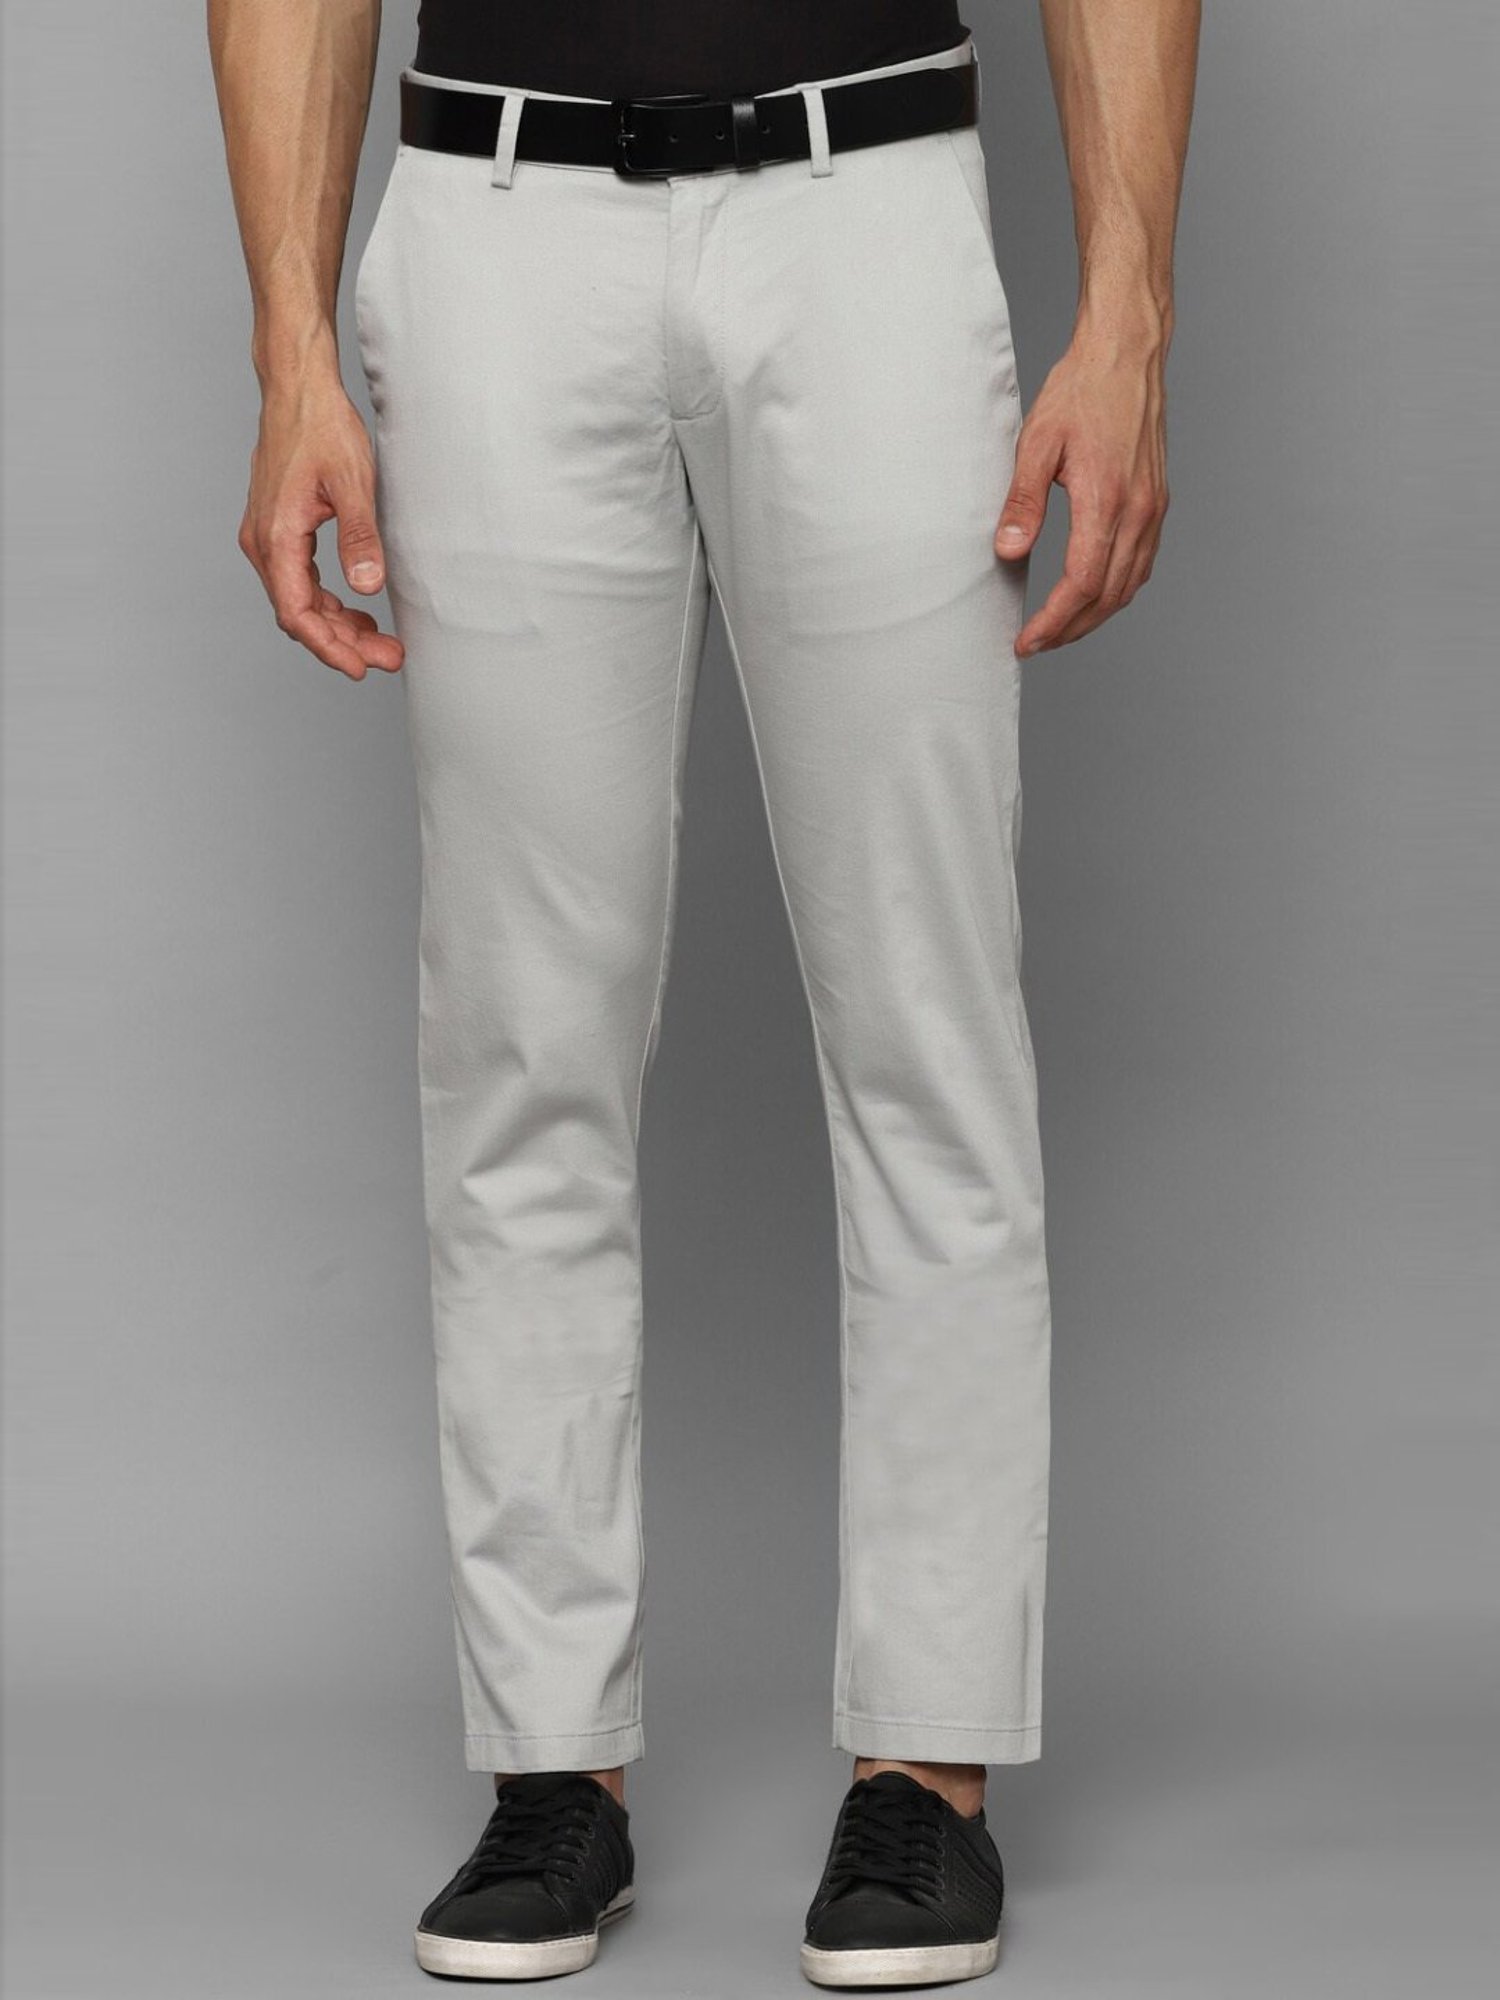 Buy Allen Solly Formal Trousers online  Men  58 products  FASHIOLAin